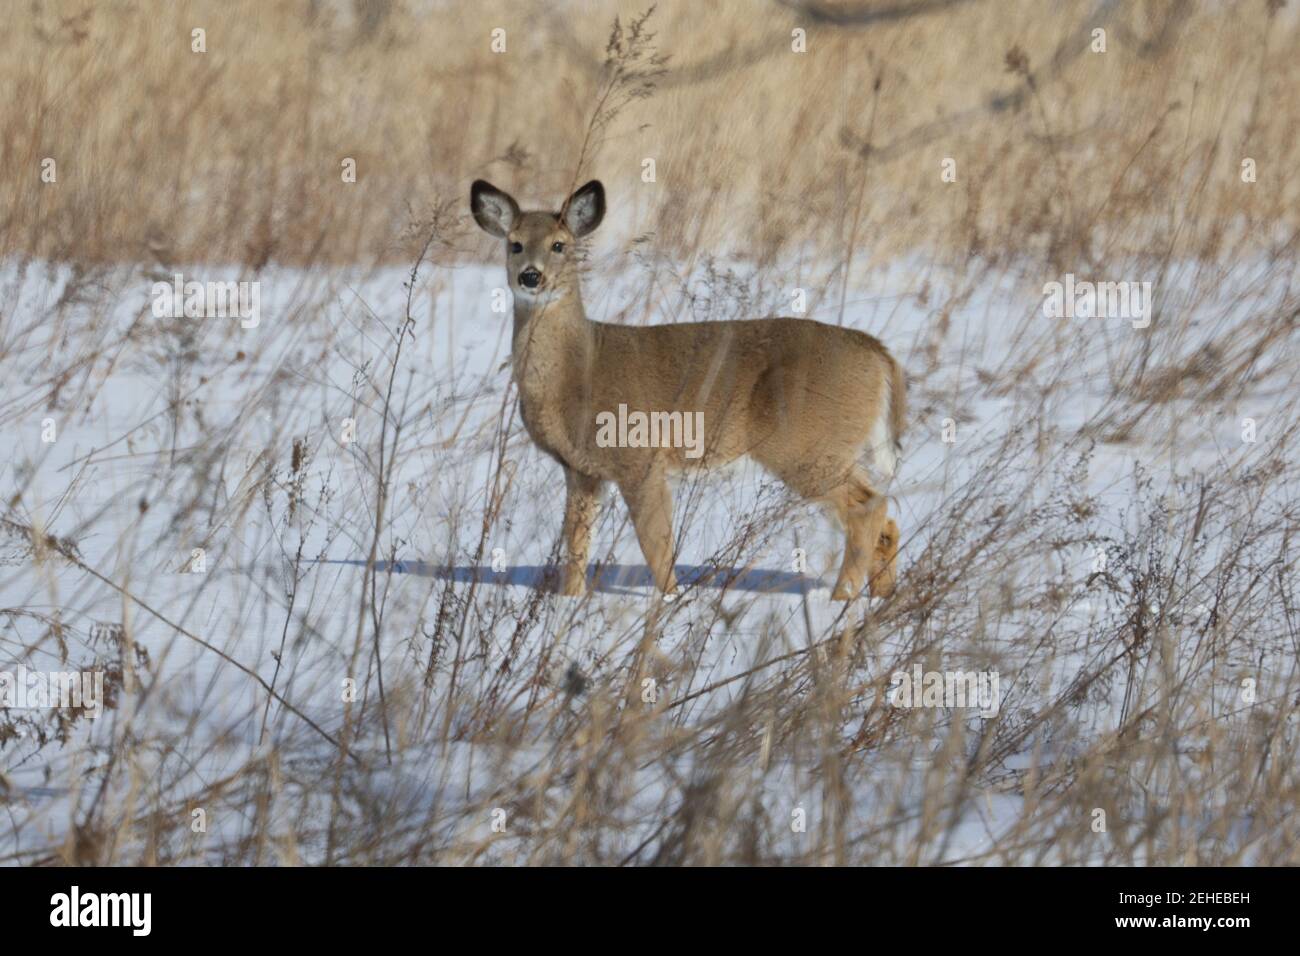 White tailed deer in the wild Stock Photo